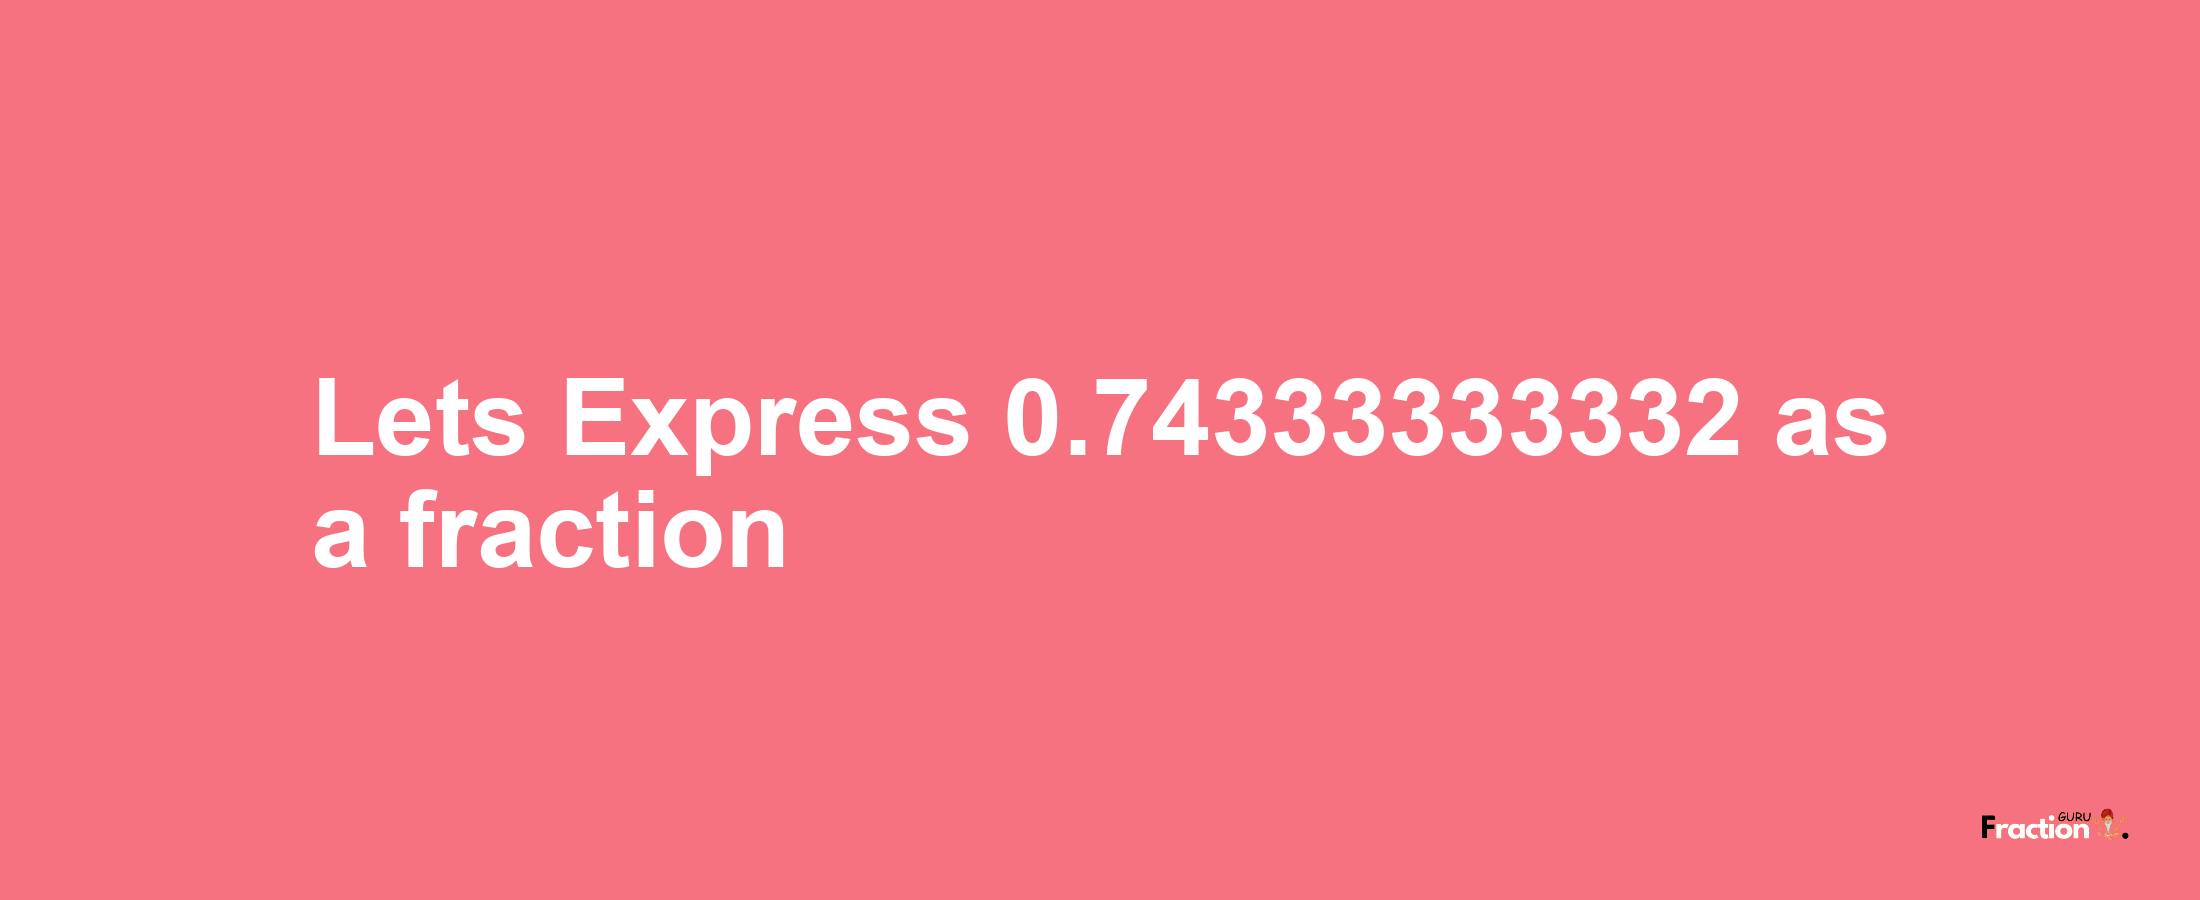 Lets Express 0.74333333332 as afraction